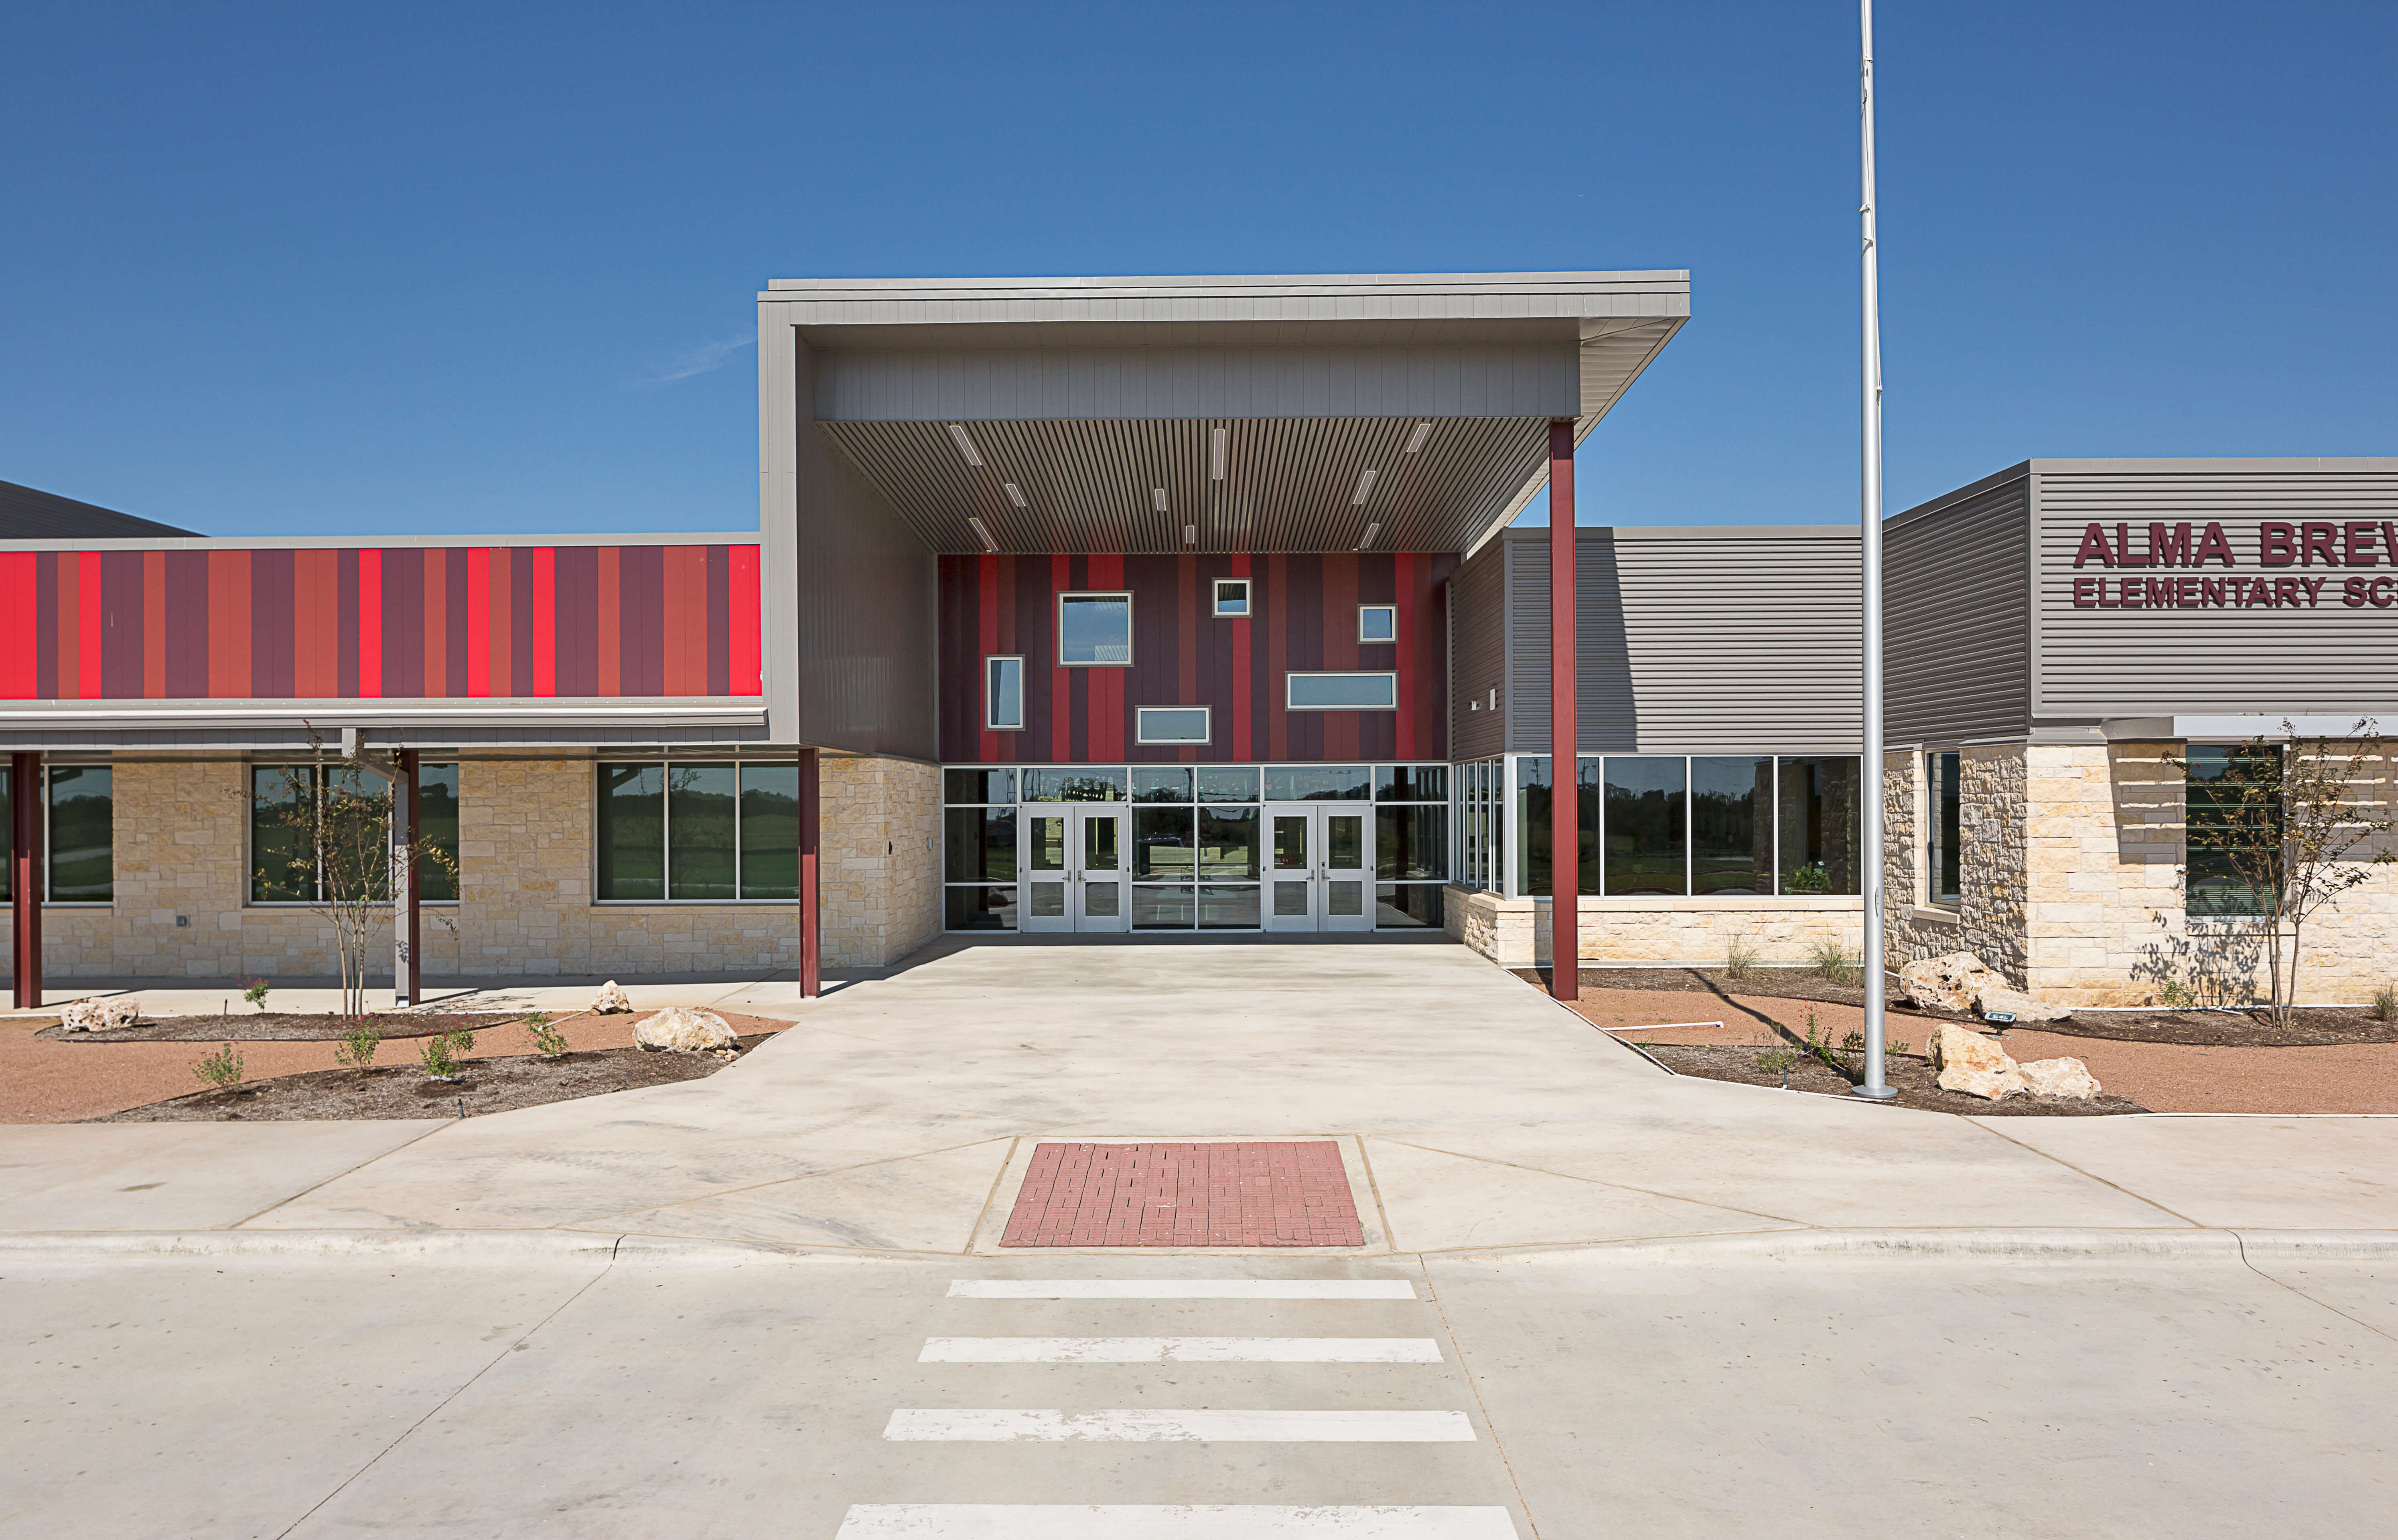 Flush metal wall panels in three shades of red in a seemingly random pattern add a playful feel to the Alma Brewer Strawn Elementary School in Lytton Springs, Texas. Photo: buenavistaphotography.com